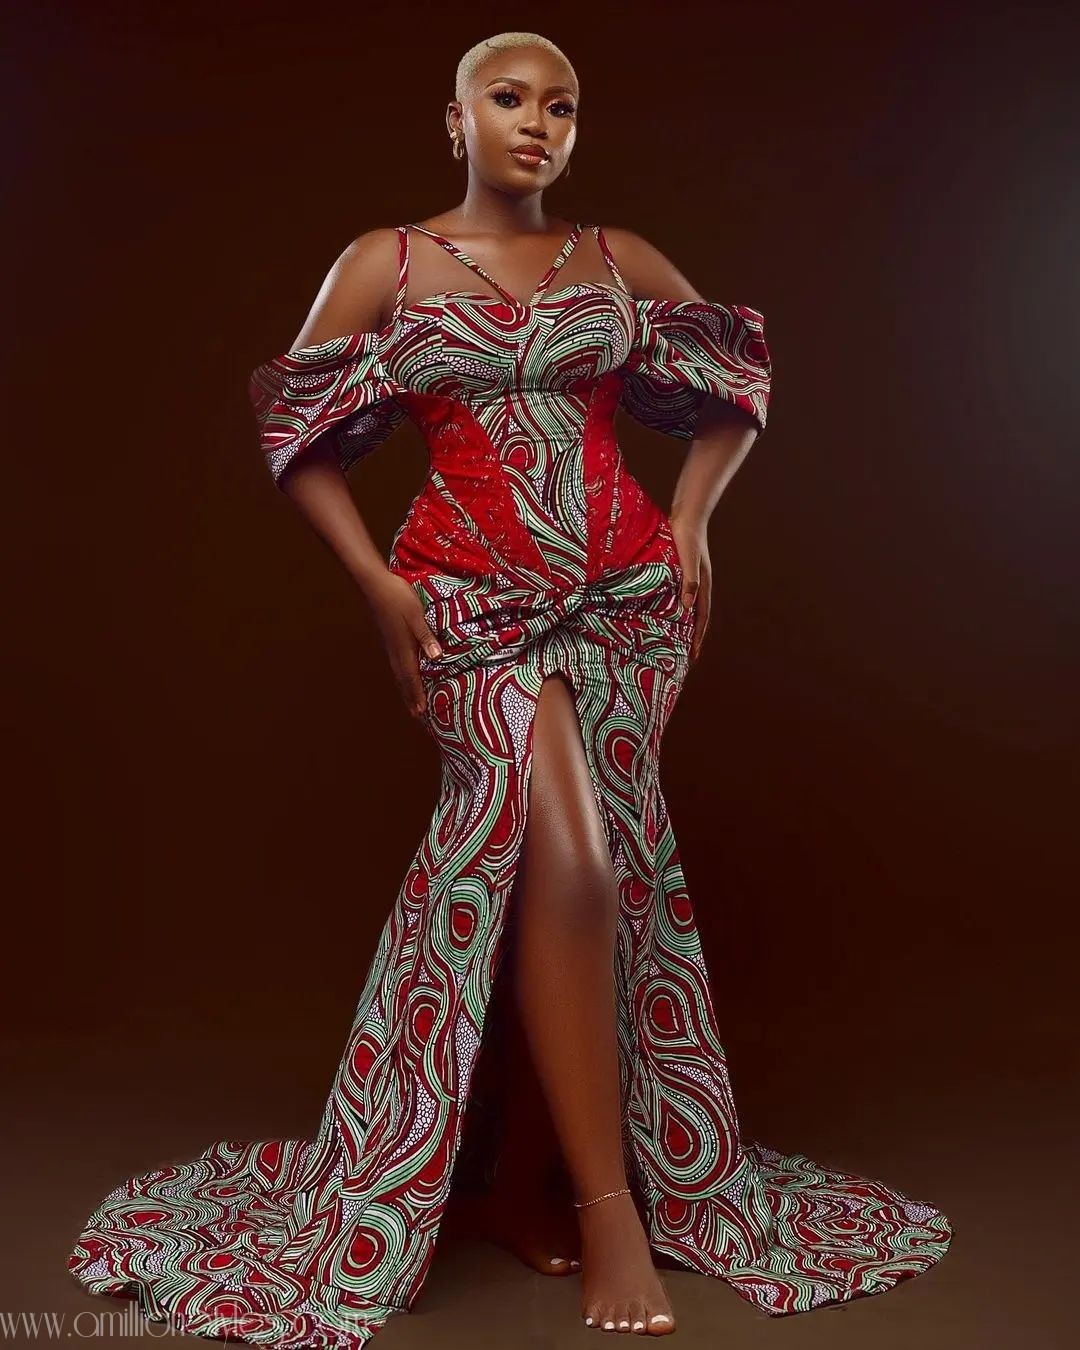 Embarrassed By Your Wardrobe? Spice It Up With These 10 Long Ankara Styles